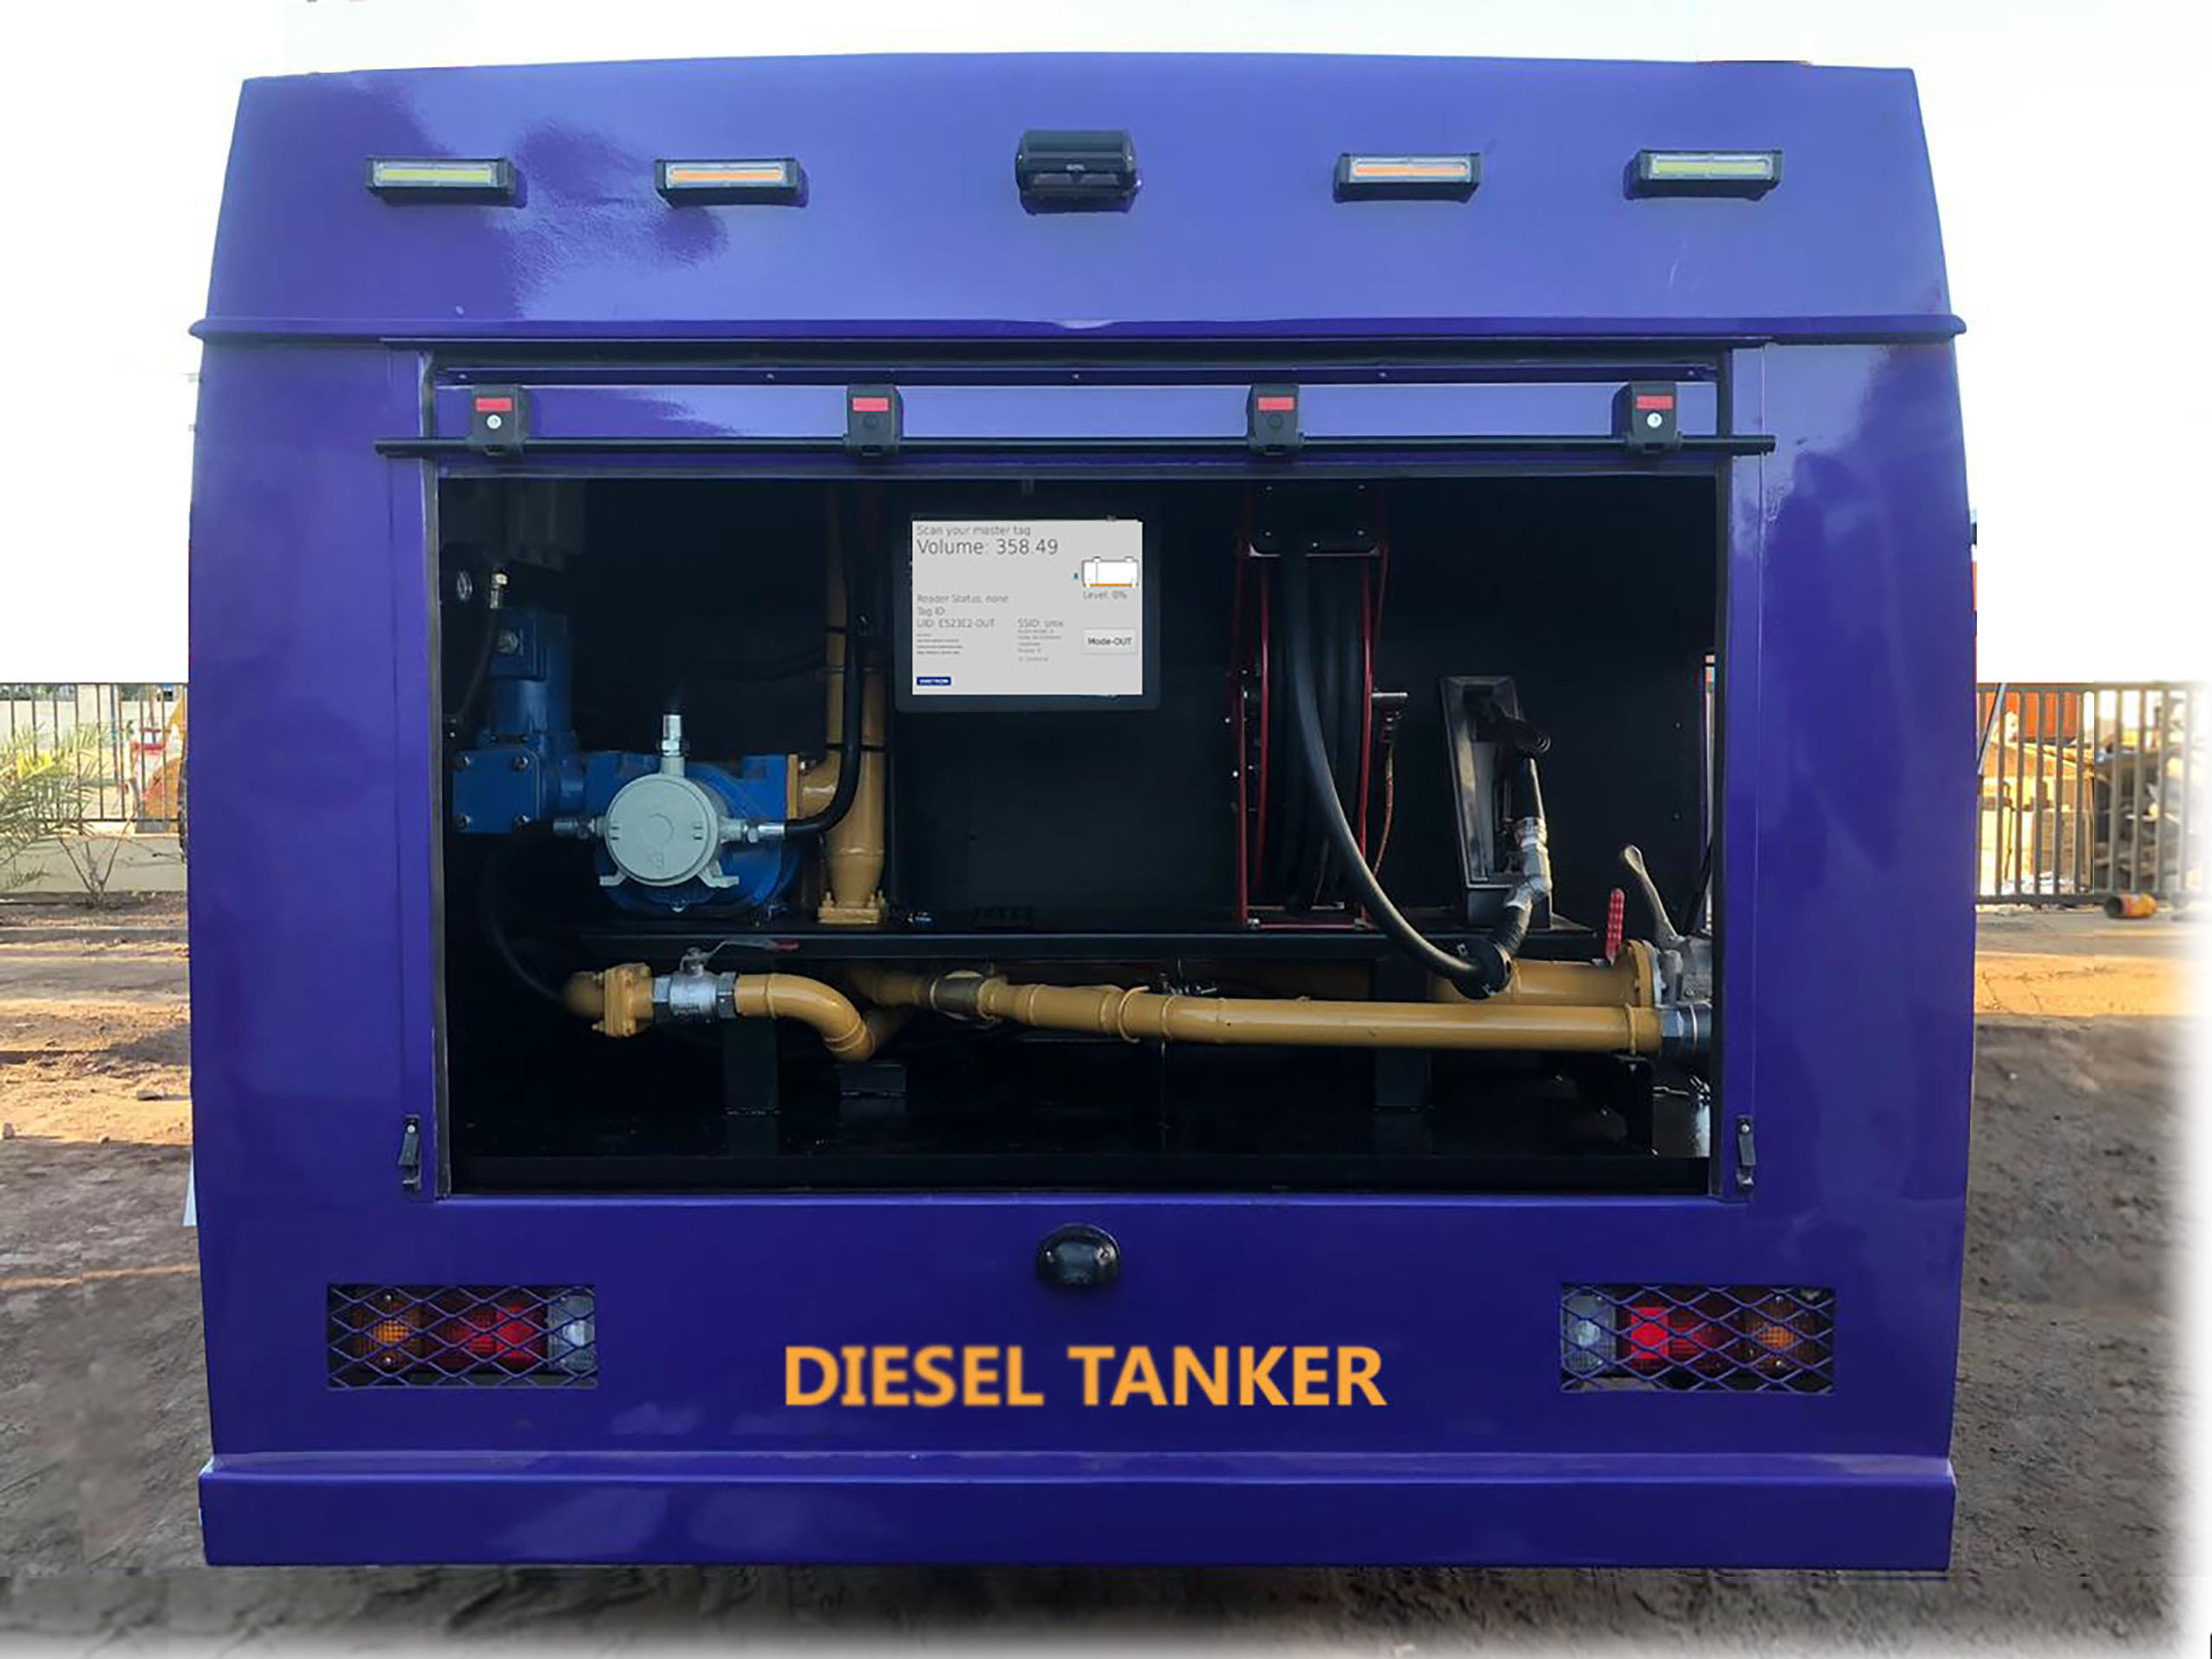 Diesel Tanker one flow meter for IN and OUT